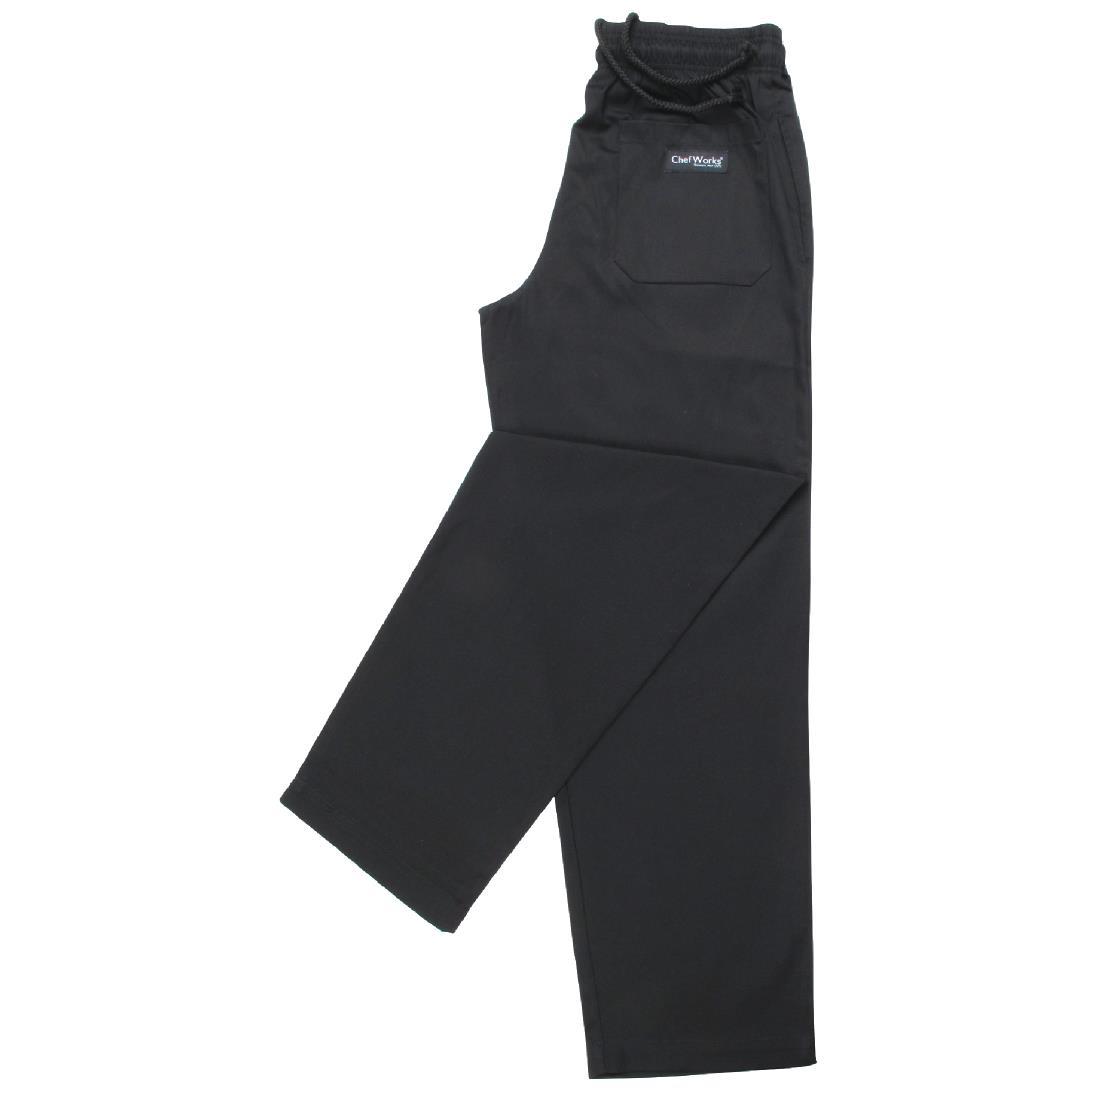 Chef Works Essential Baggy Trousers Black XS - A029-XS  - 2